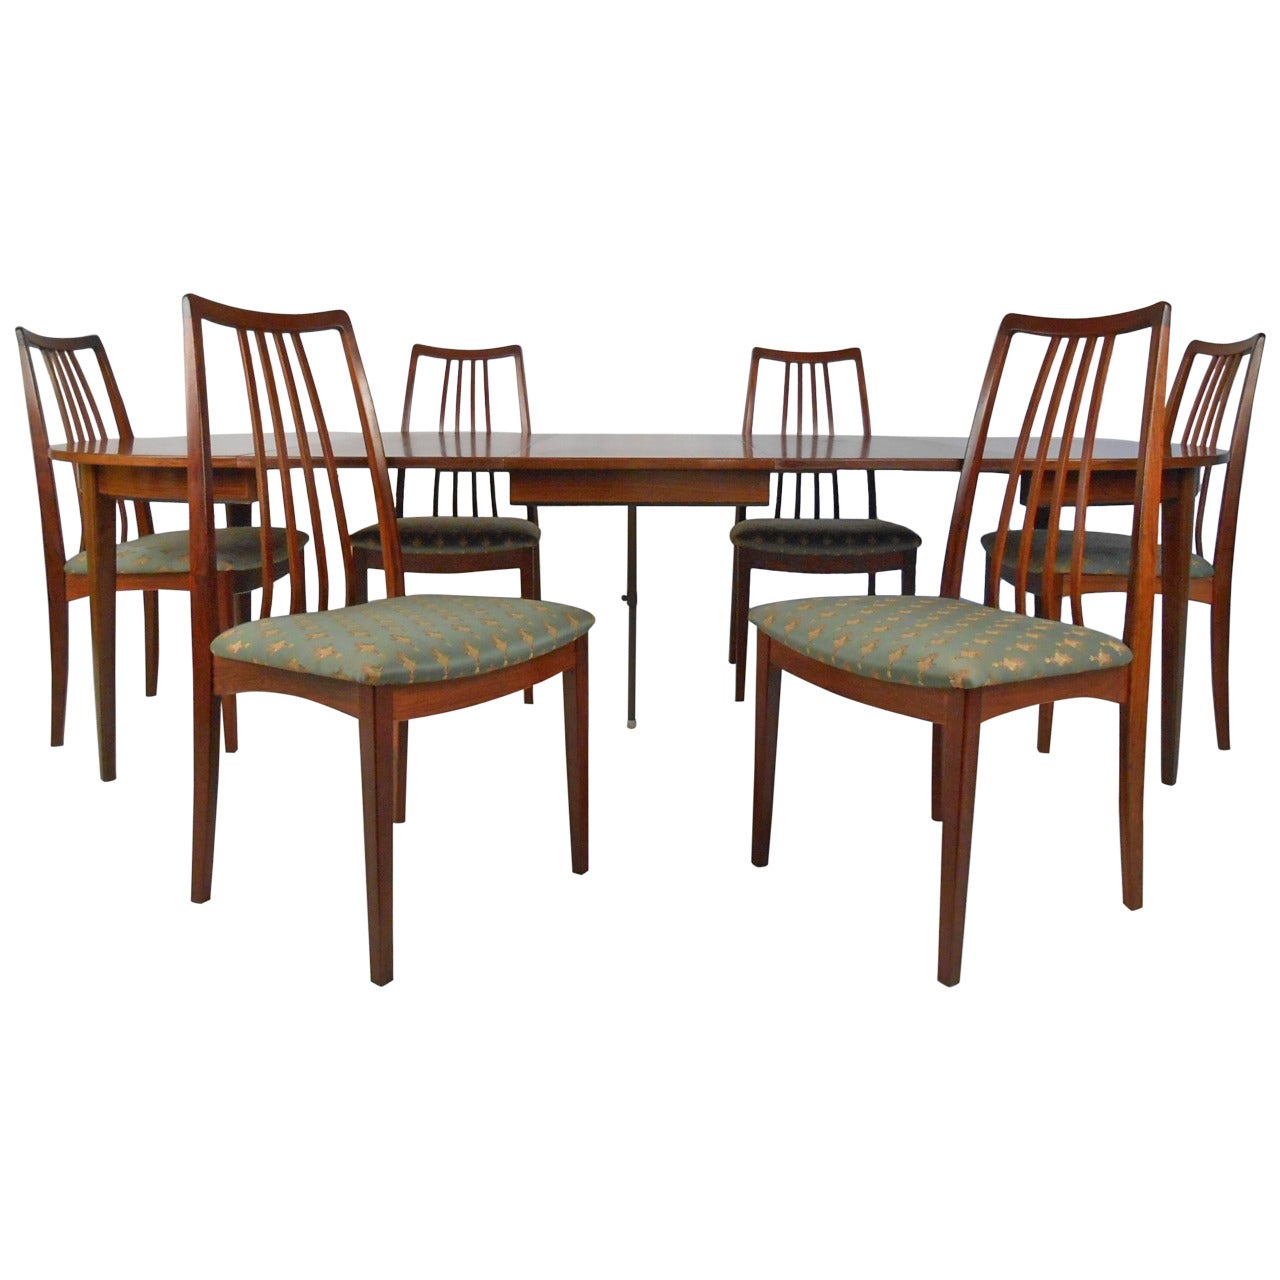 Omann Jun Rosewood Dining Table and Chairs, c. 1959 For Sale